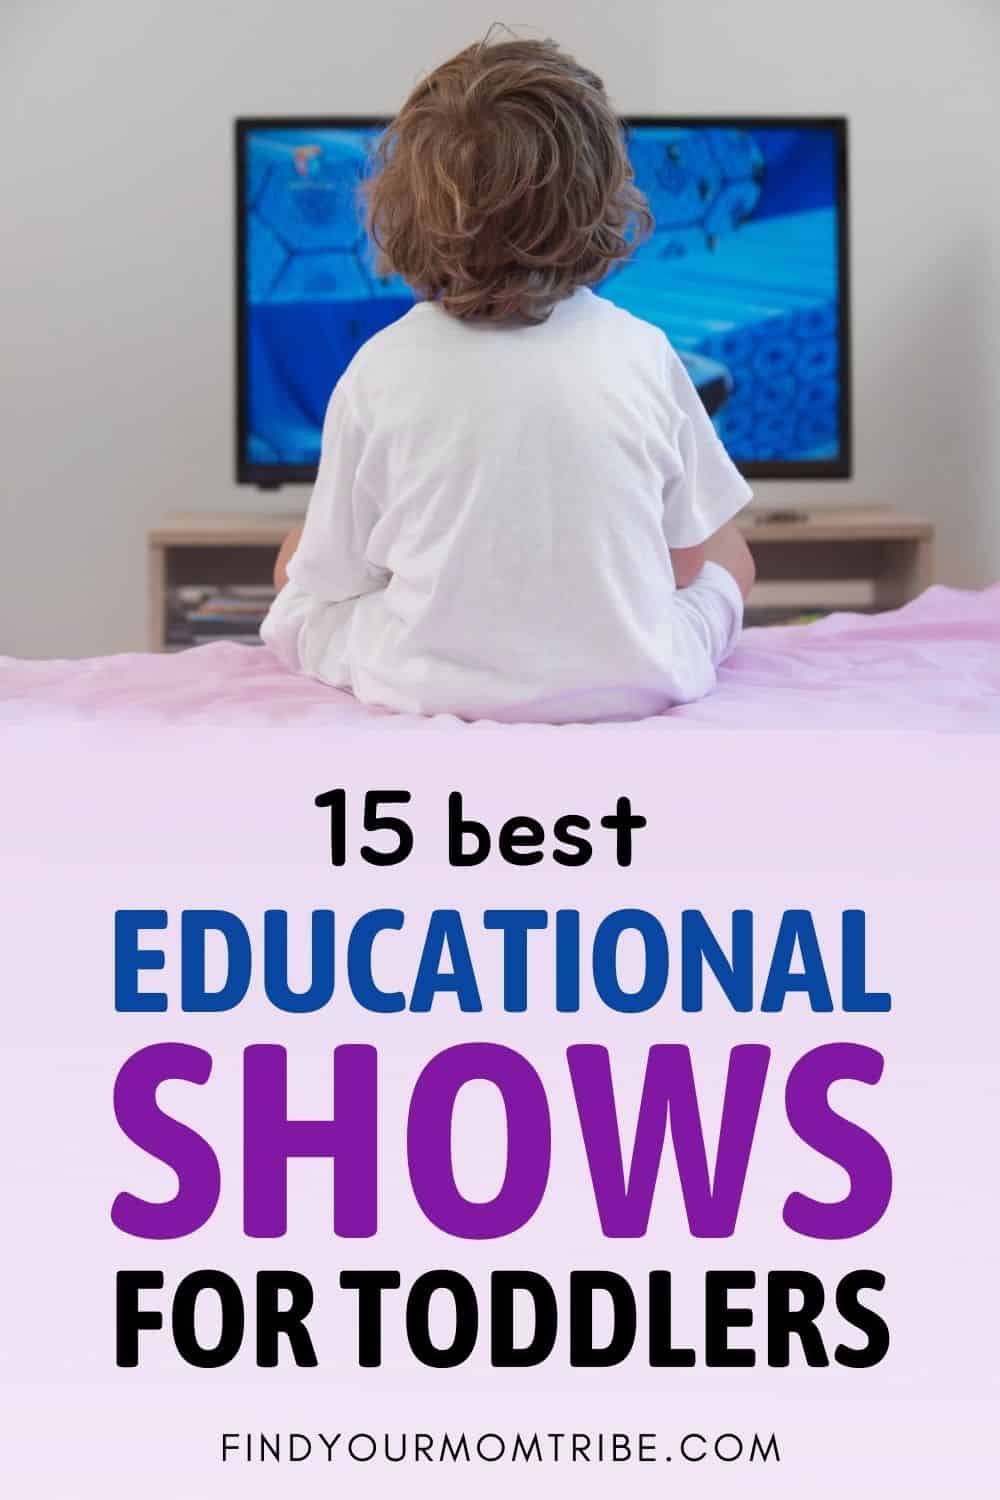 15 Best Educational Shows For Toddlers